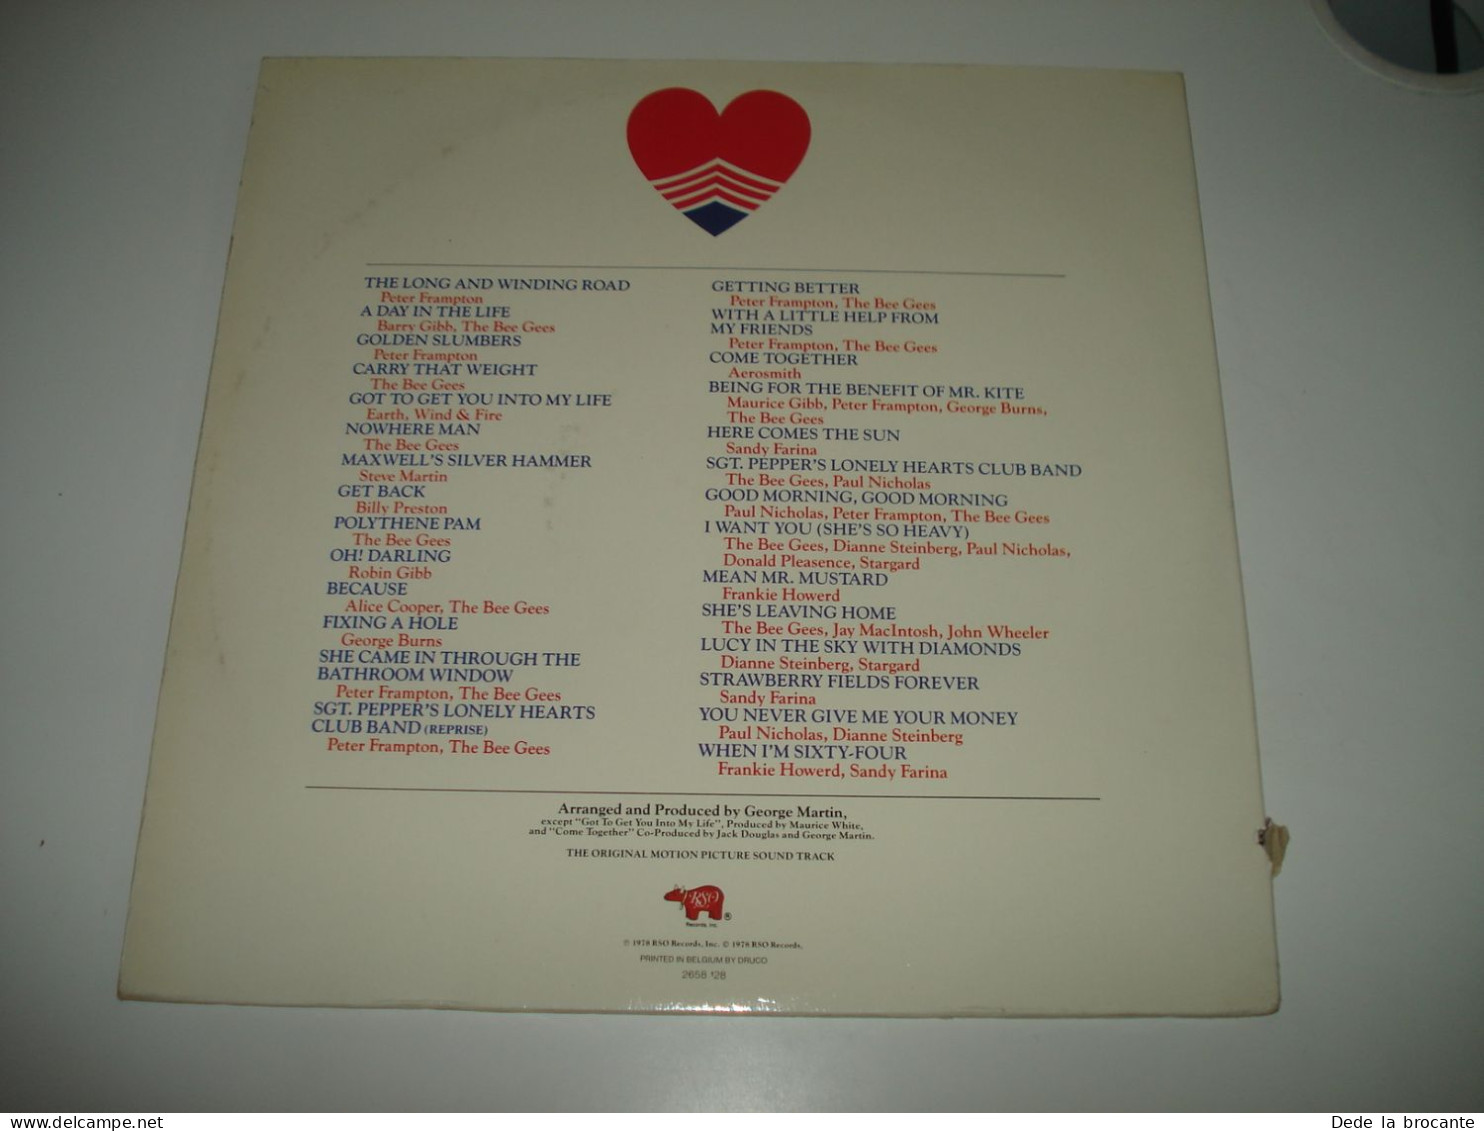 B8 / Sgt Pepper's Lonely Hearts Club Band  Bee Gees - 2658 128 - BE 1978 - M/VG+ - Música De Peliculas